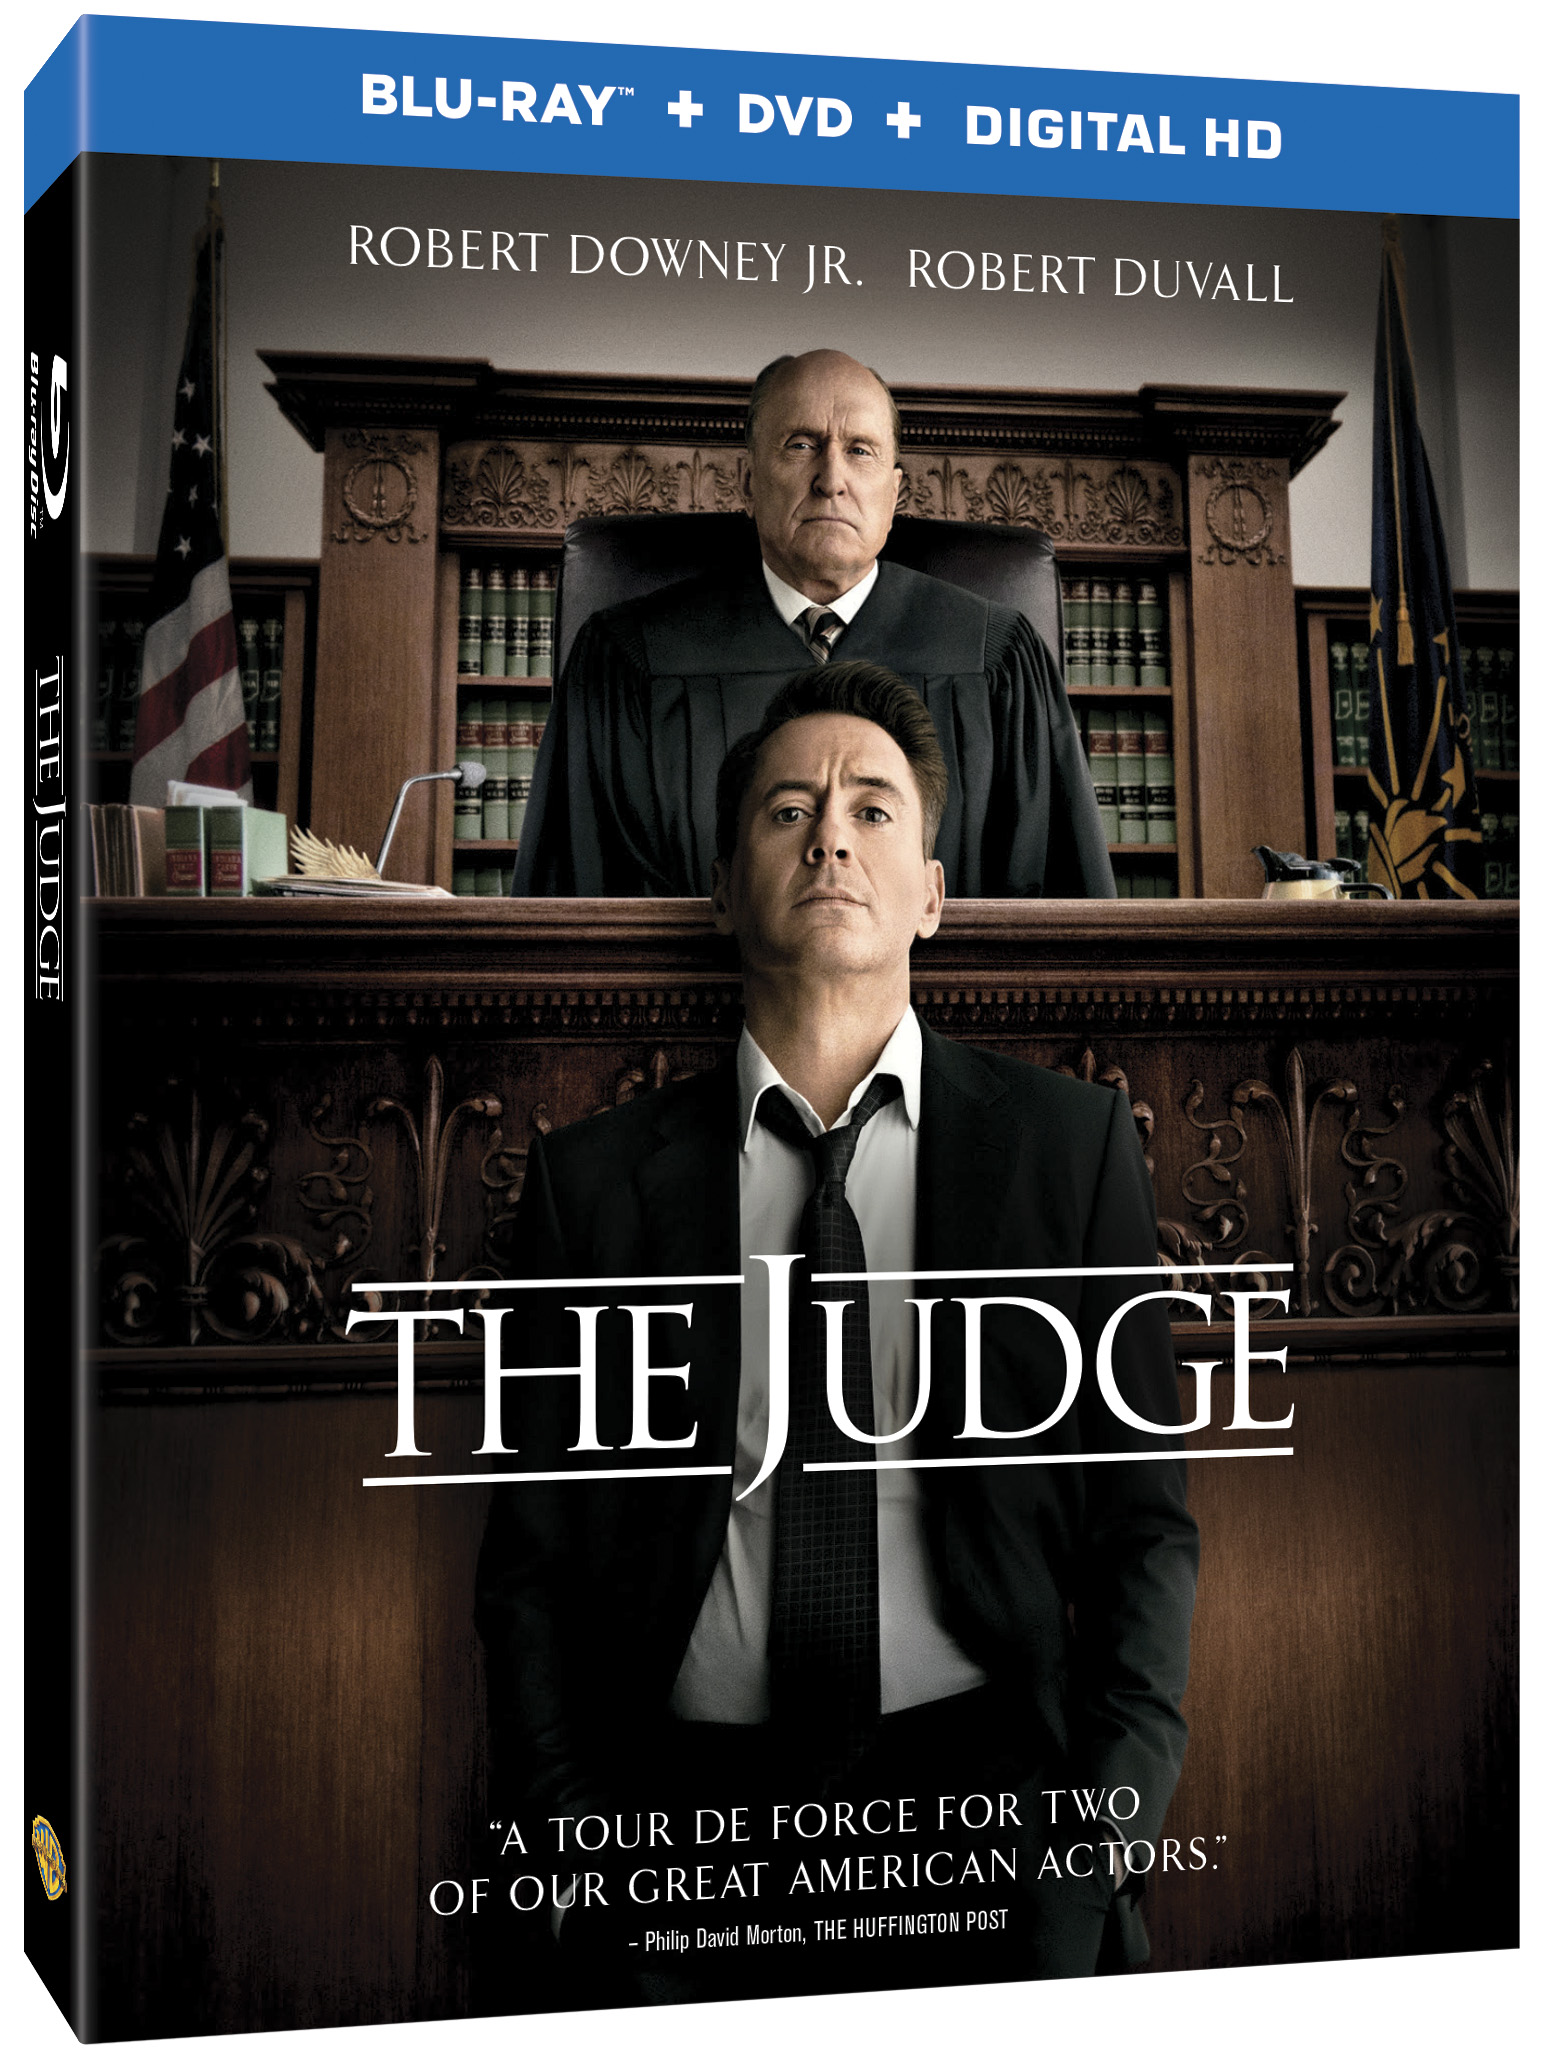 The Judge Blu-ray Review